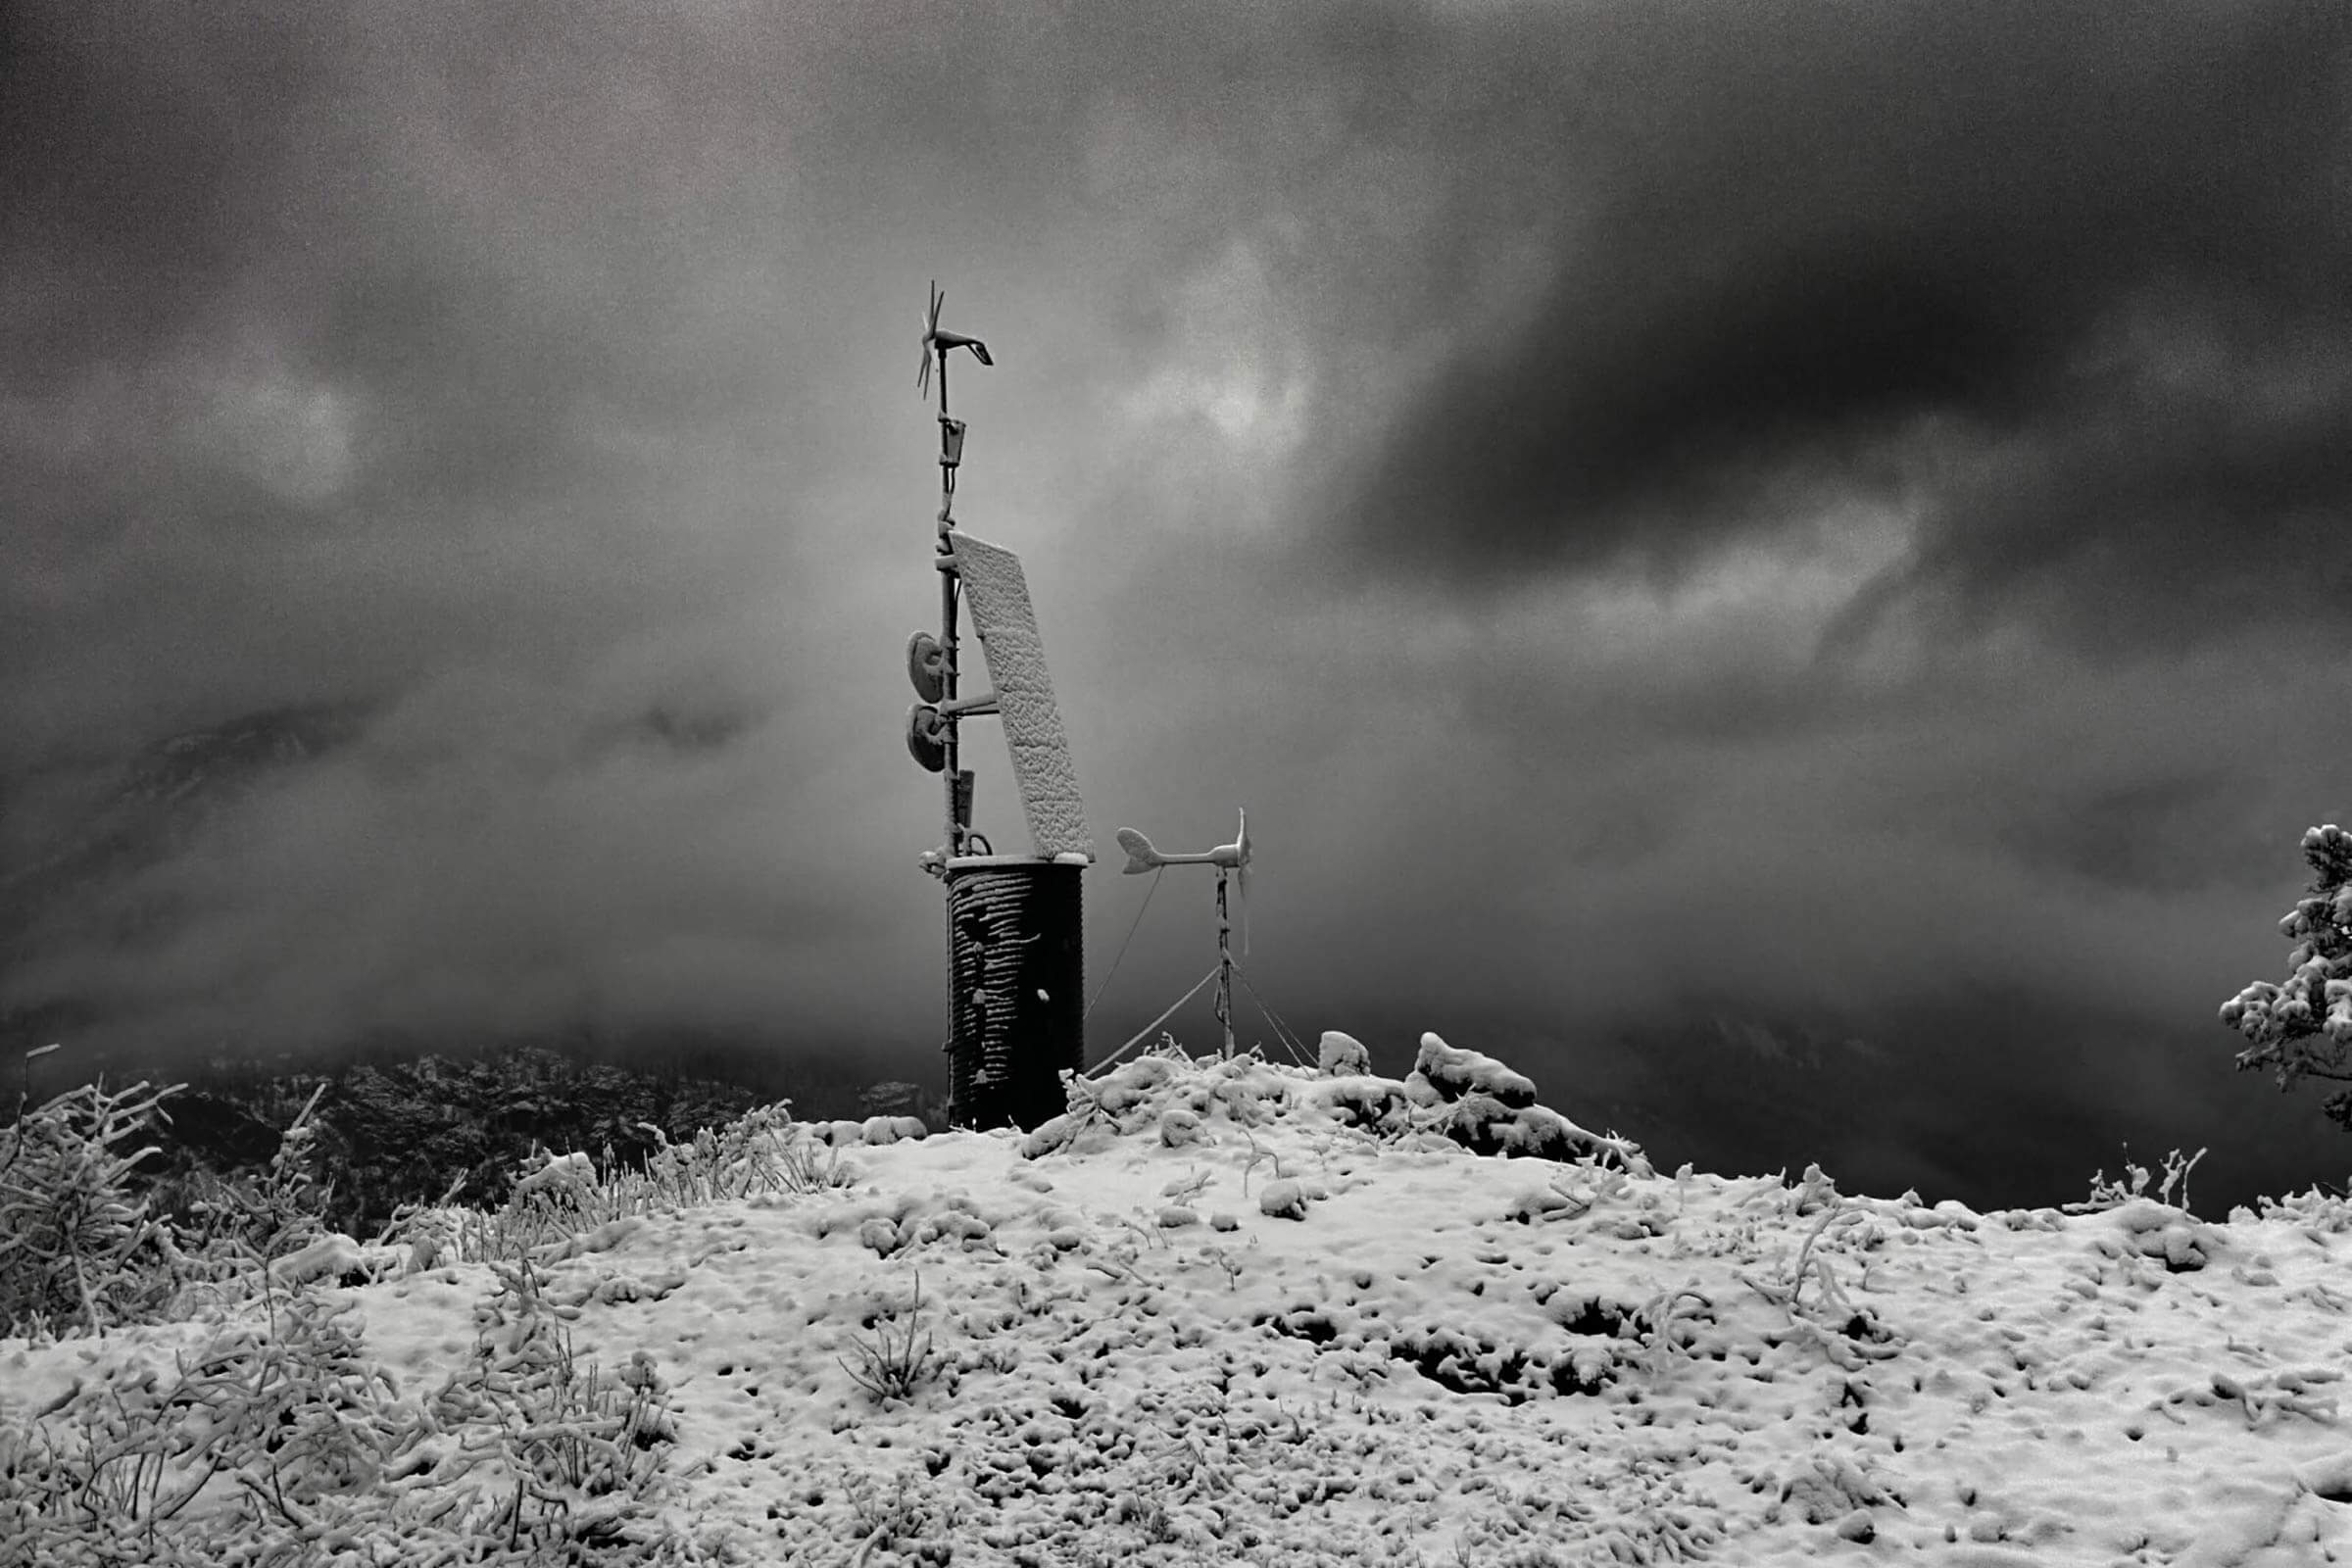 A weather station measures meteorological conditions, including wind speed, ambient pressure, and temperature. Weather stations like this one collect data to identify ideal sites for wind turbines and telecommunication towers.